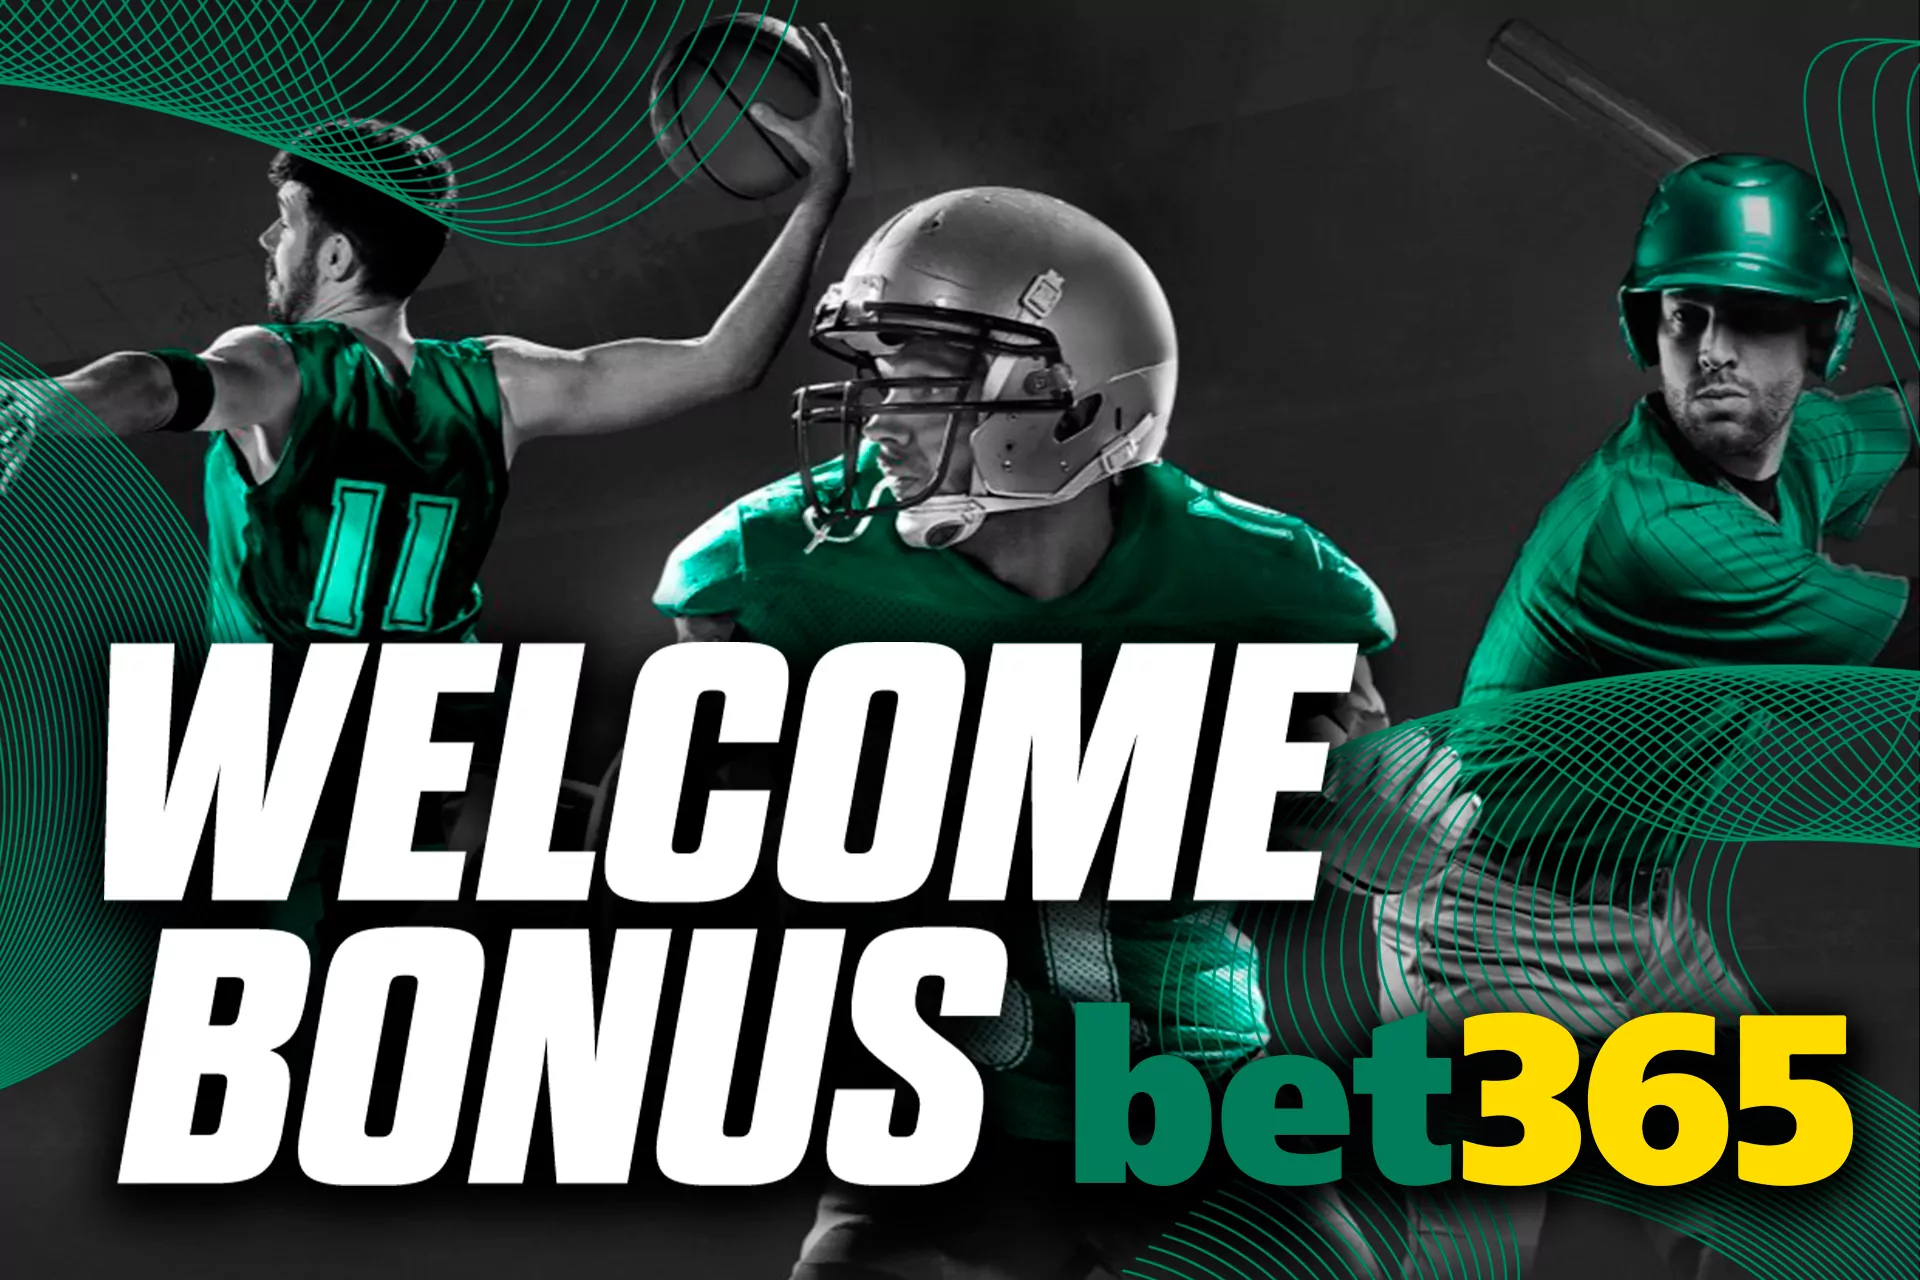 The welcome bonus of bet365 can be gotten by new users.